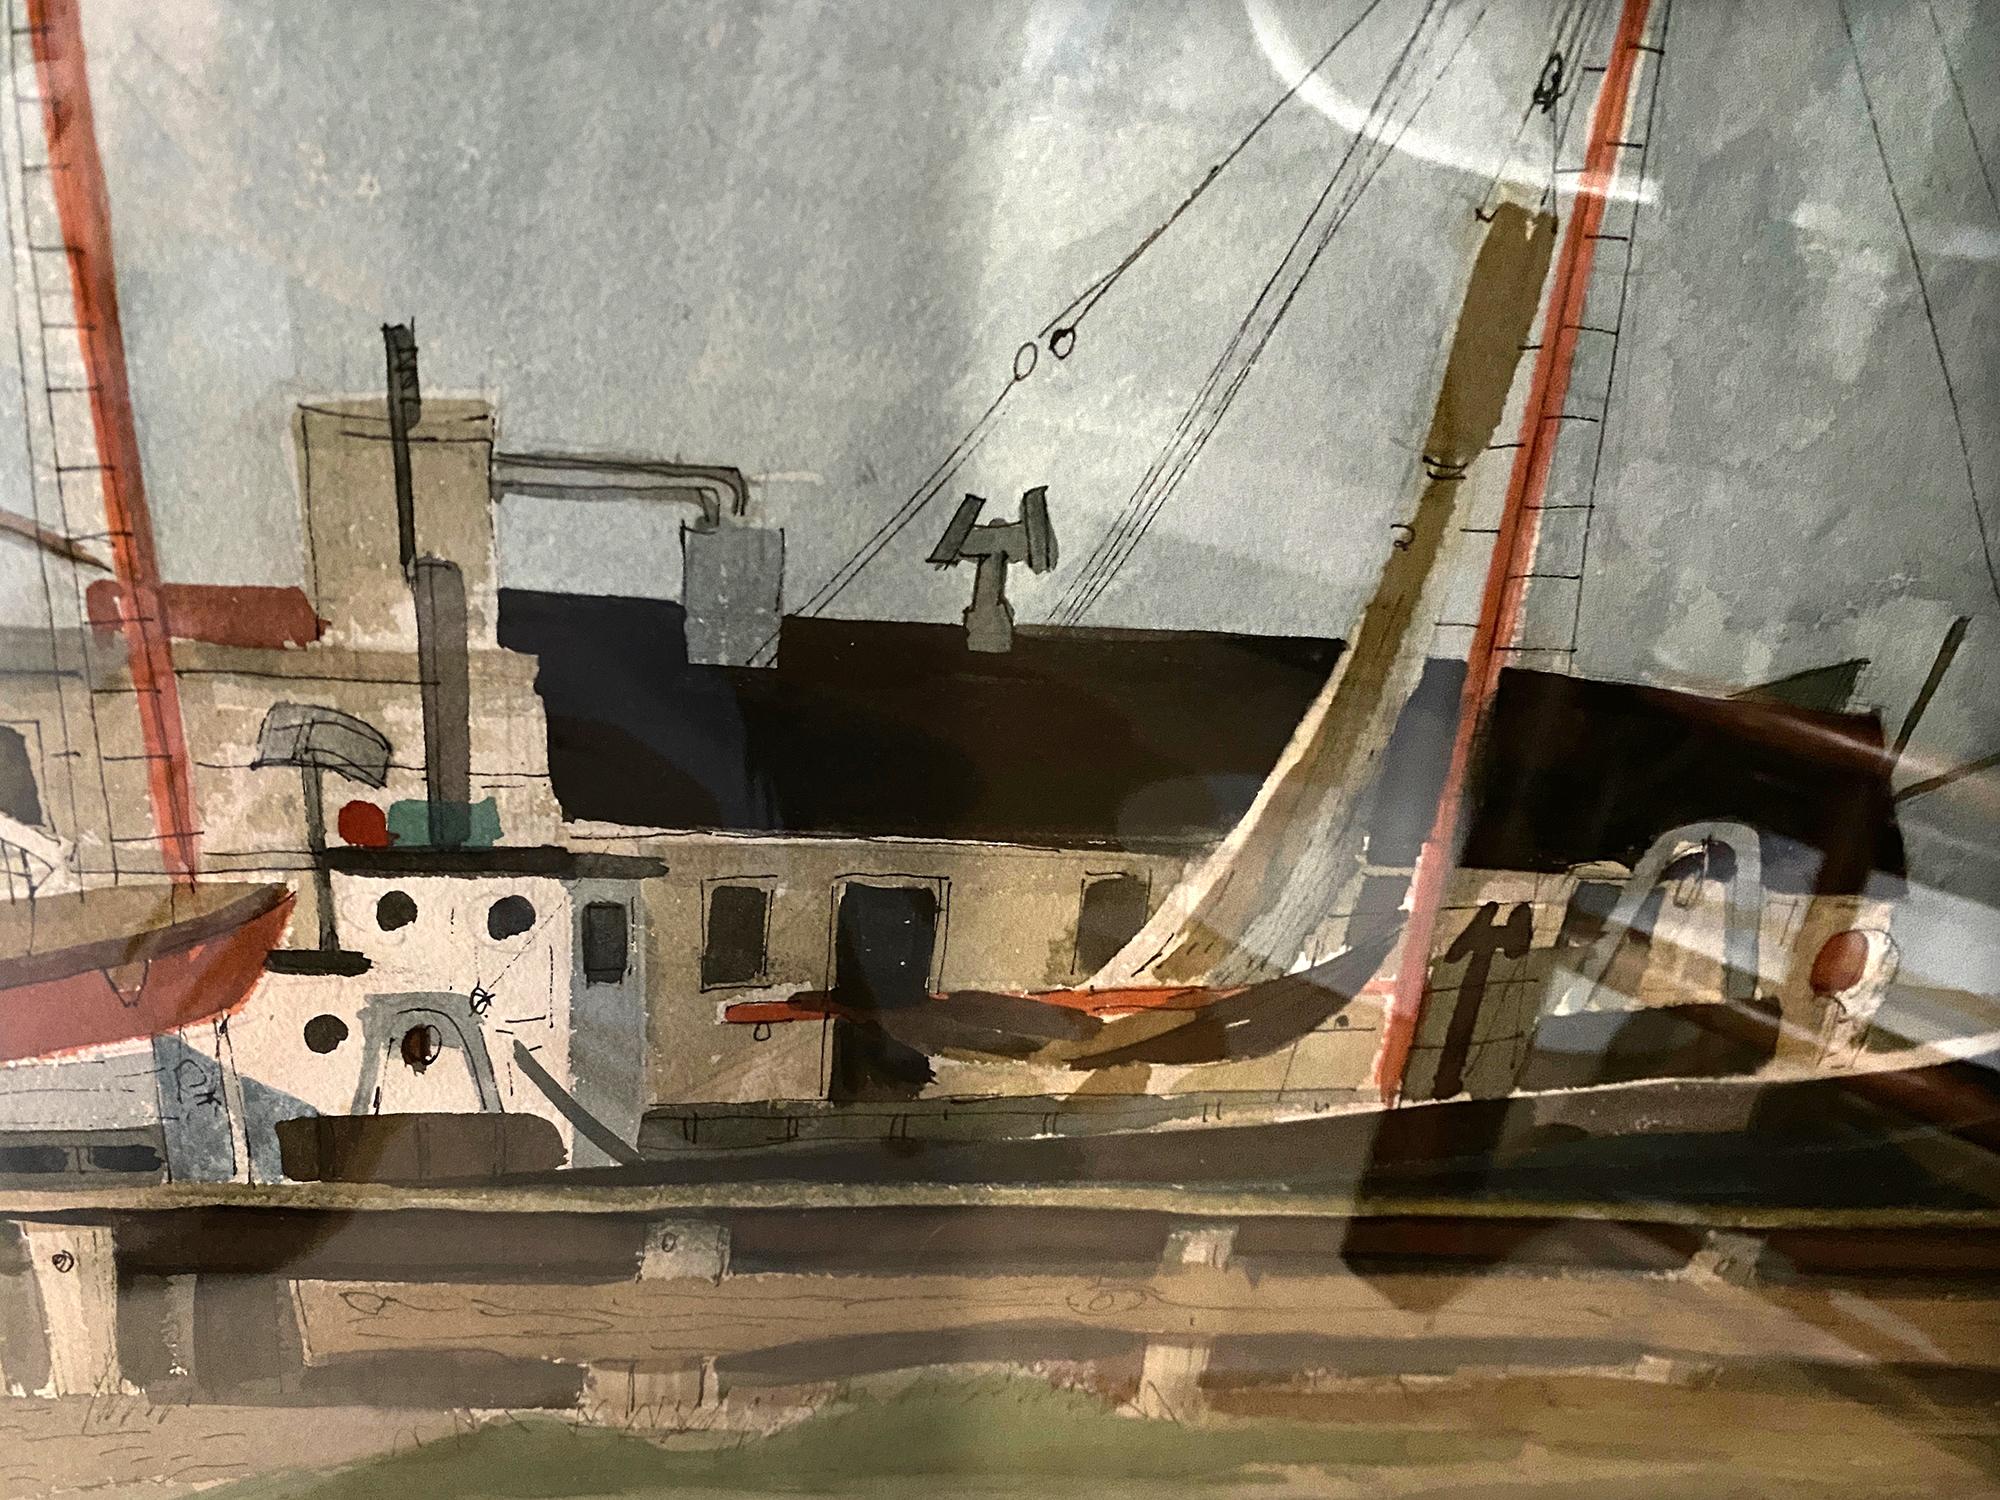 
In this New England wharf scene, Morris Blackburn composes a familiar assemblage of boats, dock, and  weathered, wooden buildings against a crisp blue morning sky with light clouds. His expert handling of the watercolor medium is evident with the